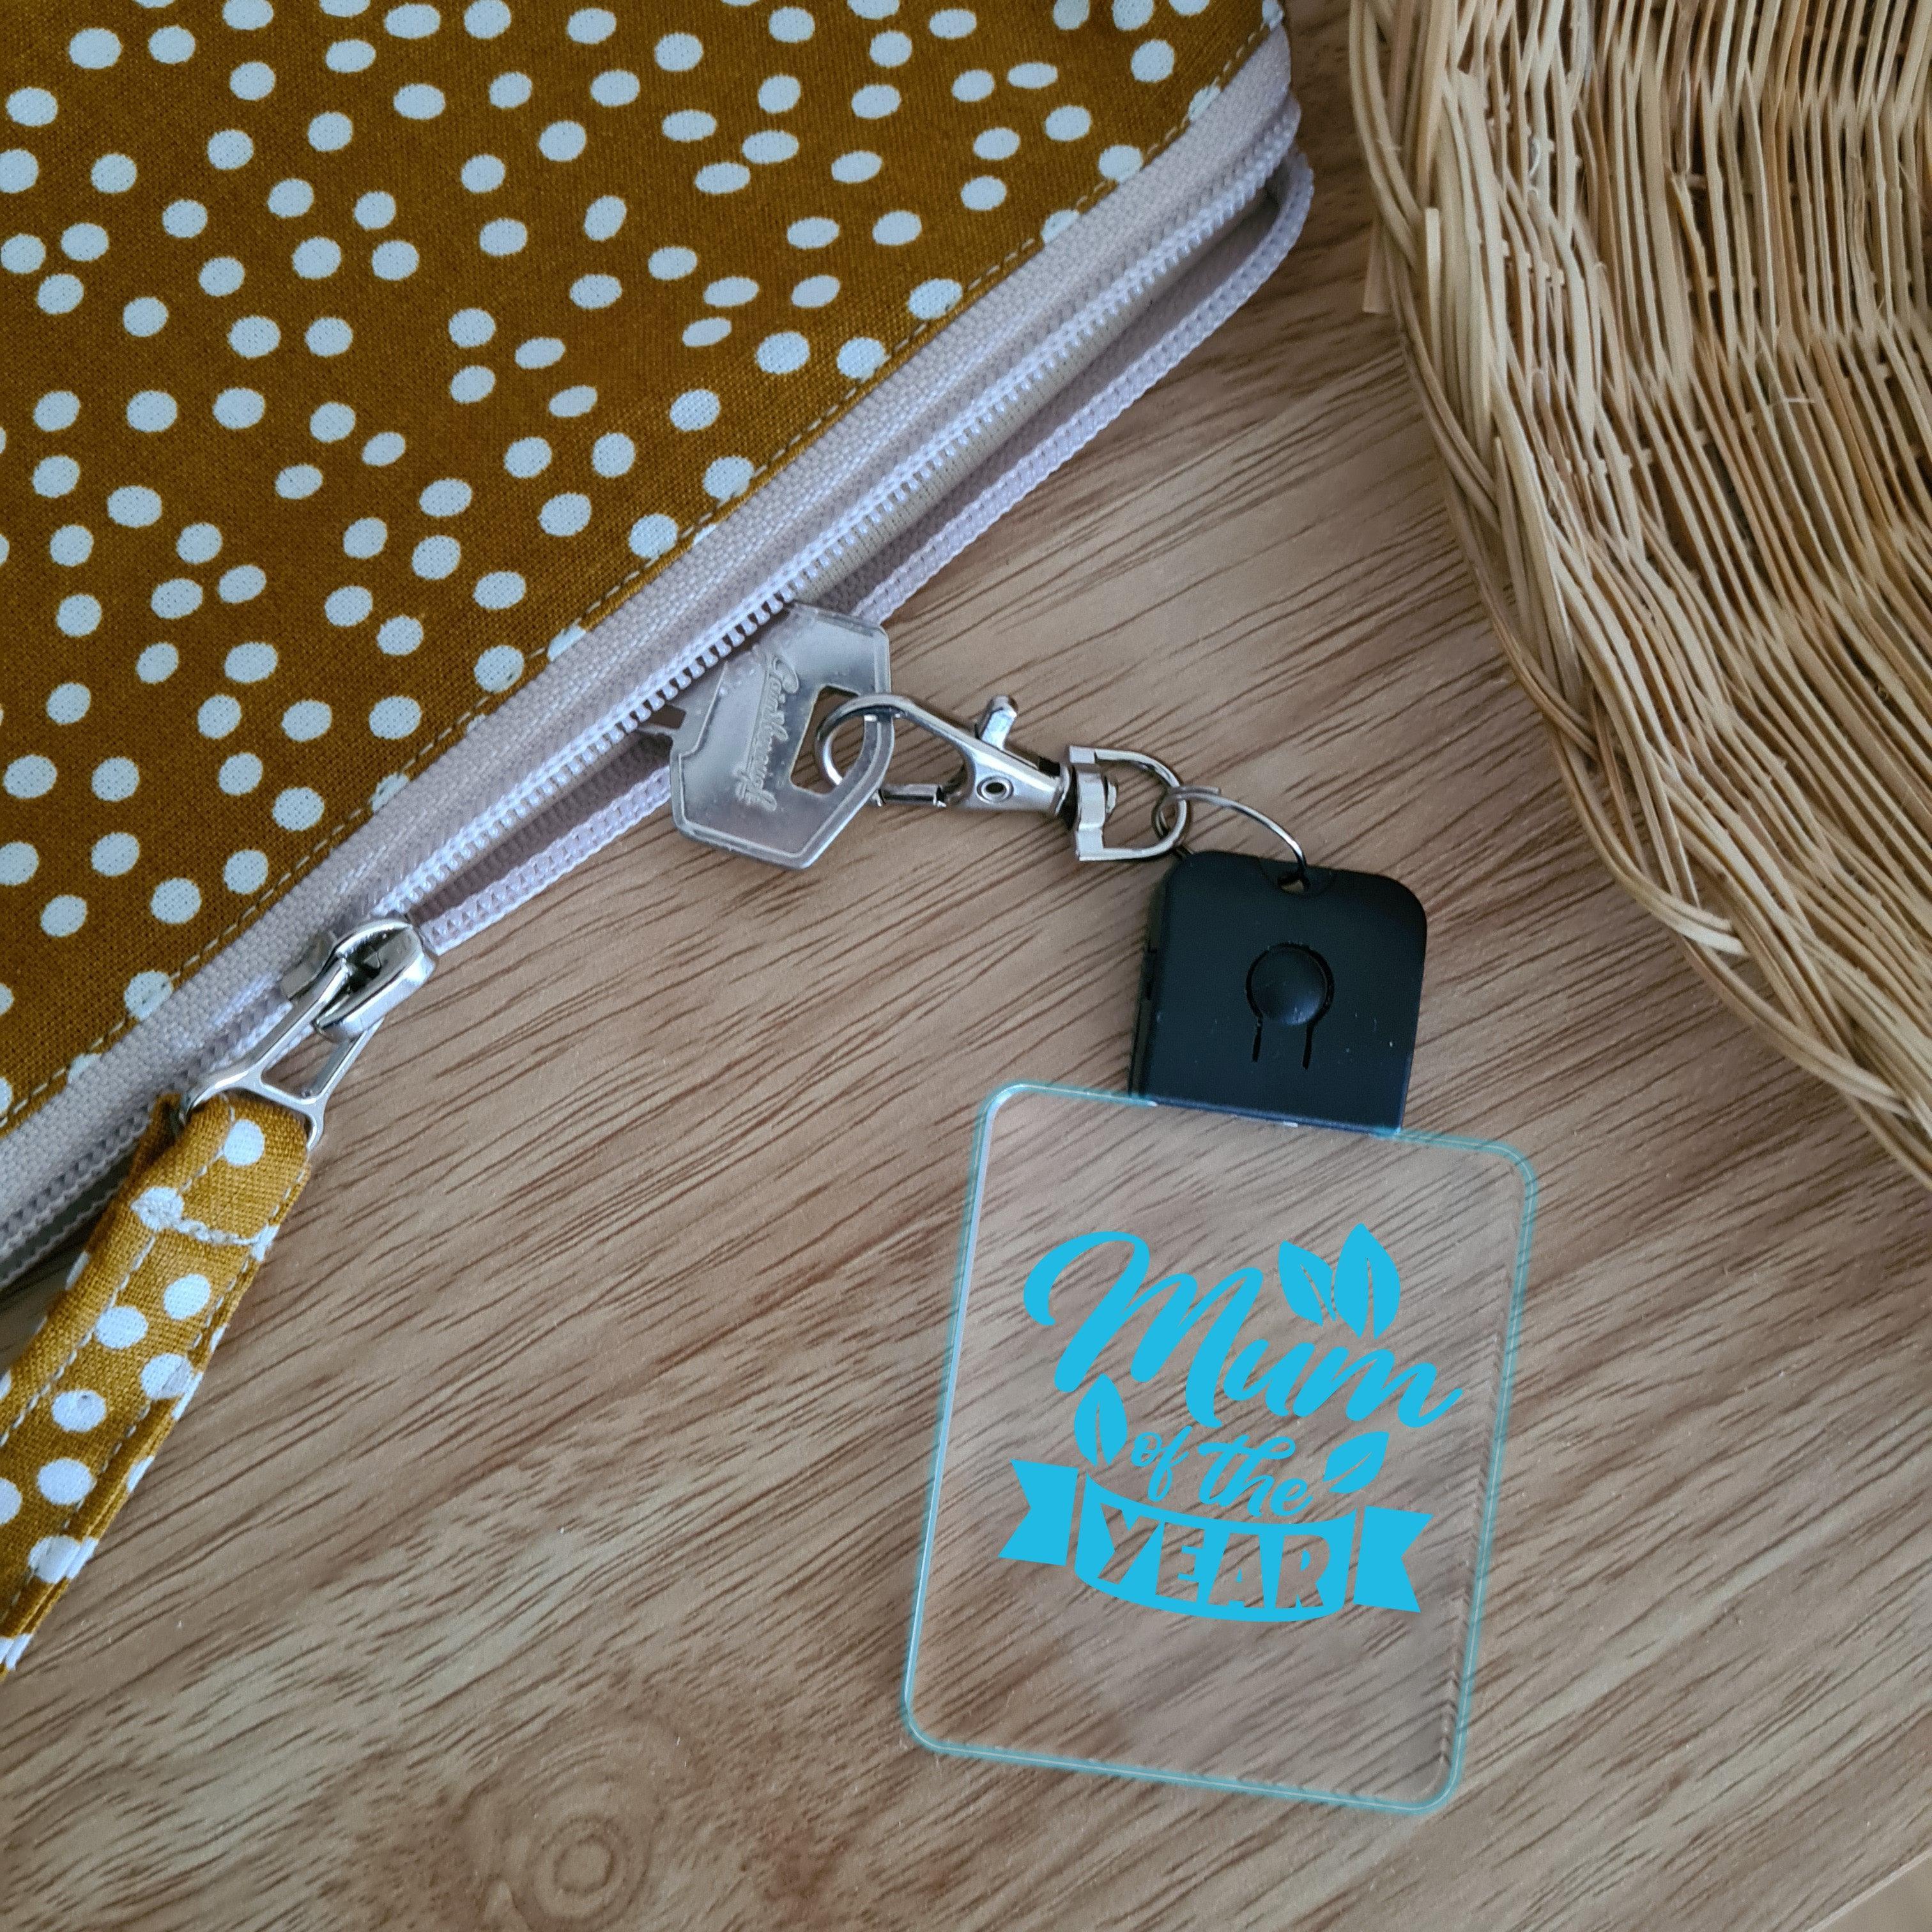 LED Glowing Keychain 🌕 - Mum of the Year - The Willow Corner